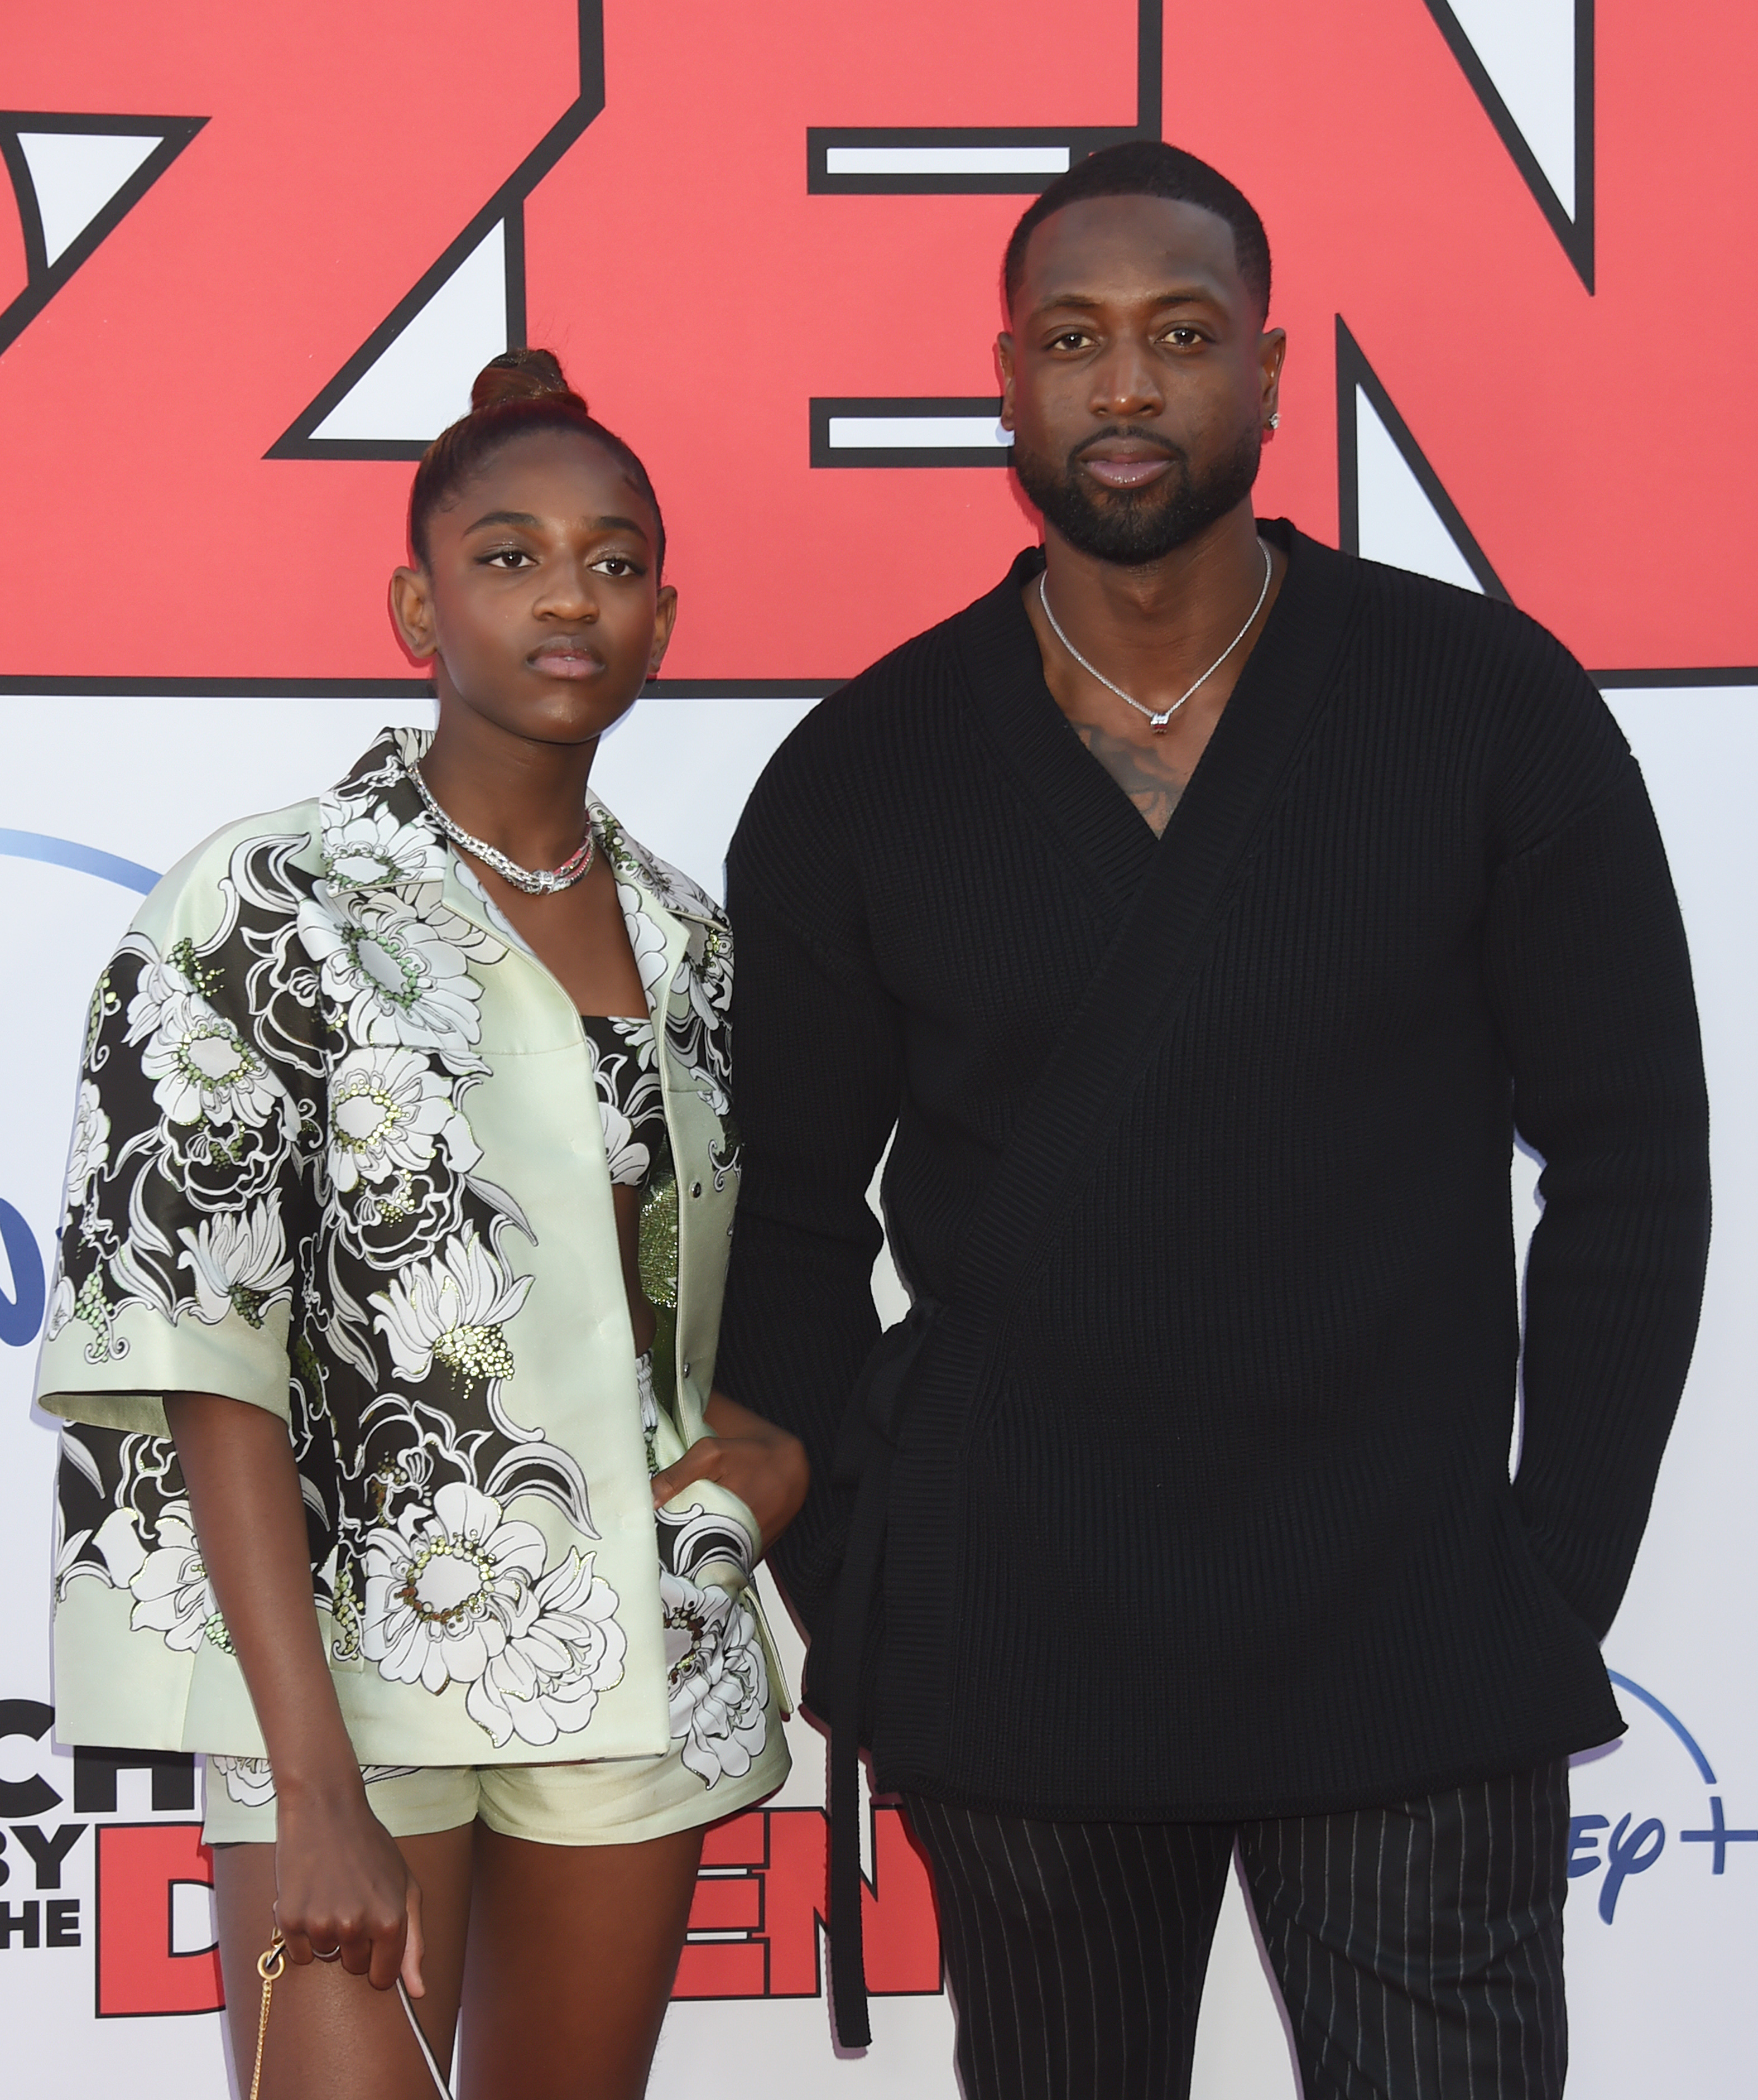 Zaya and Dwyane Wade at the premiere of "Cheaper By The Dozen" in Los Angeles, California on March 16, 2022 | Source: Getty Images